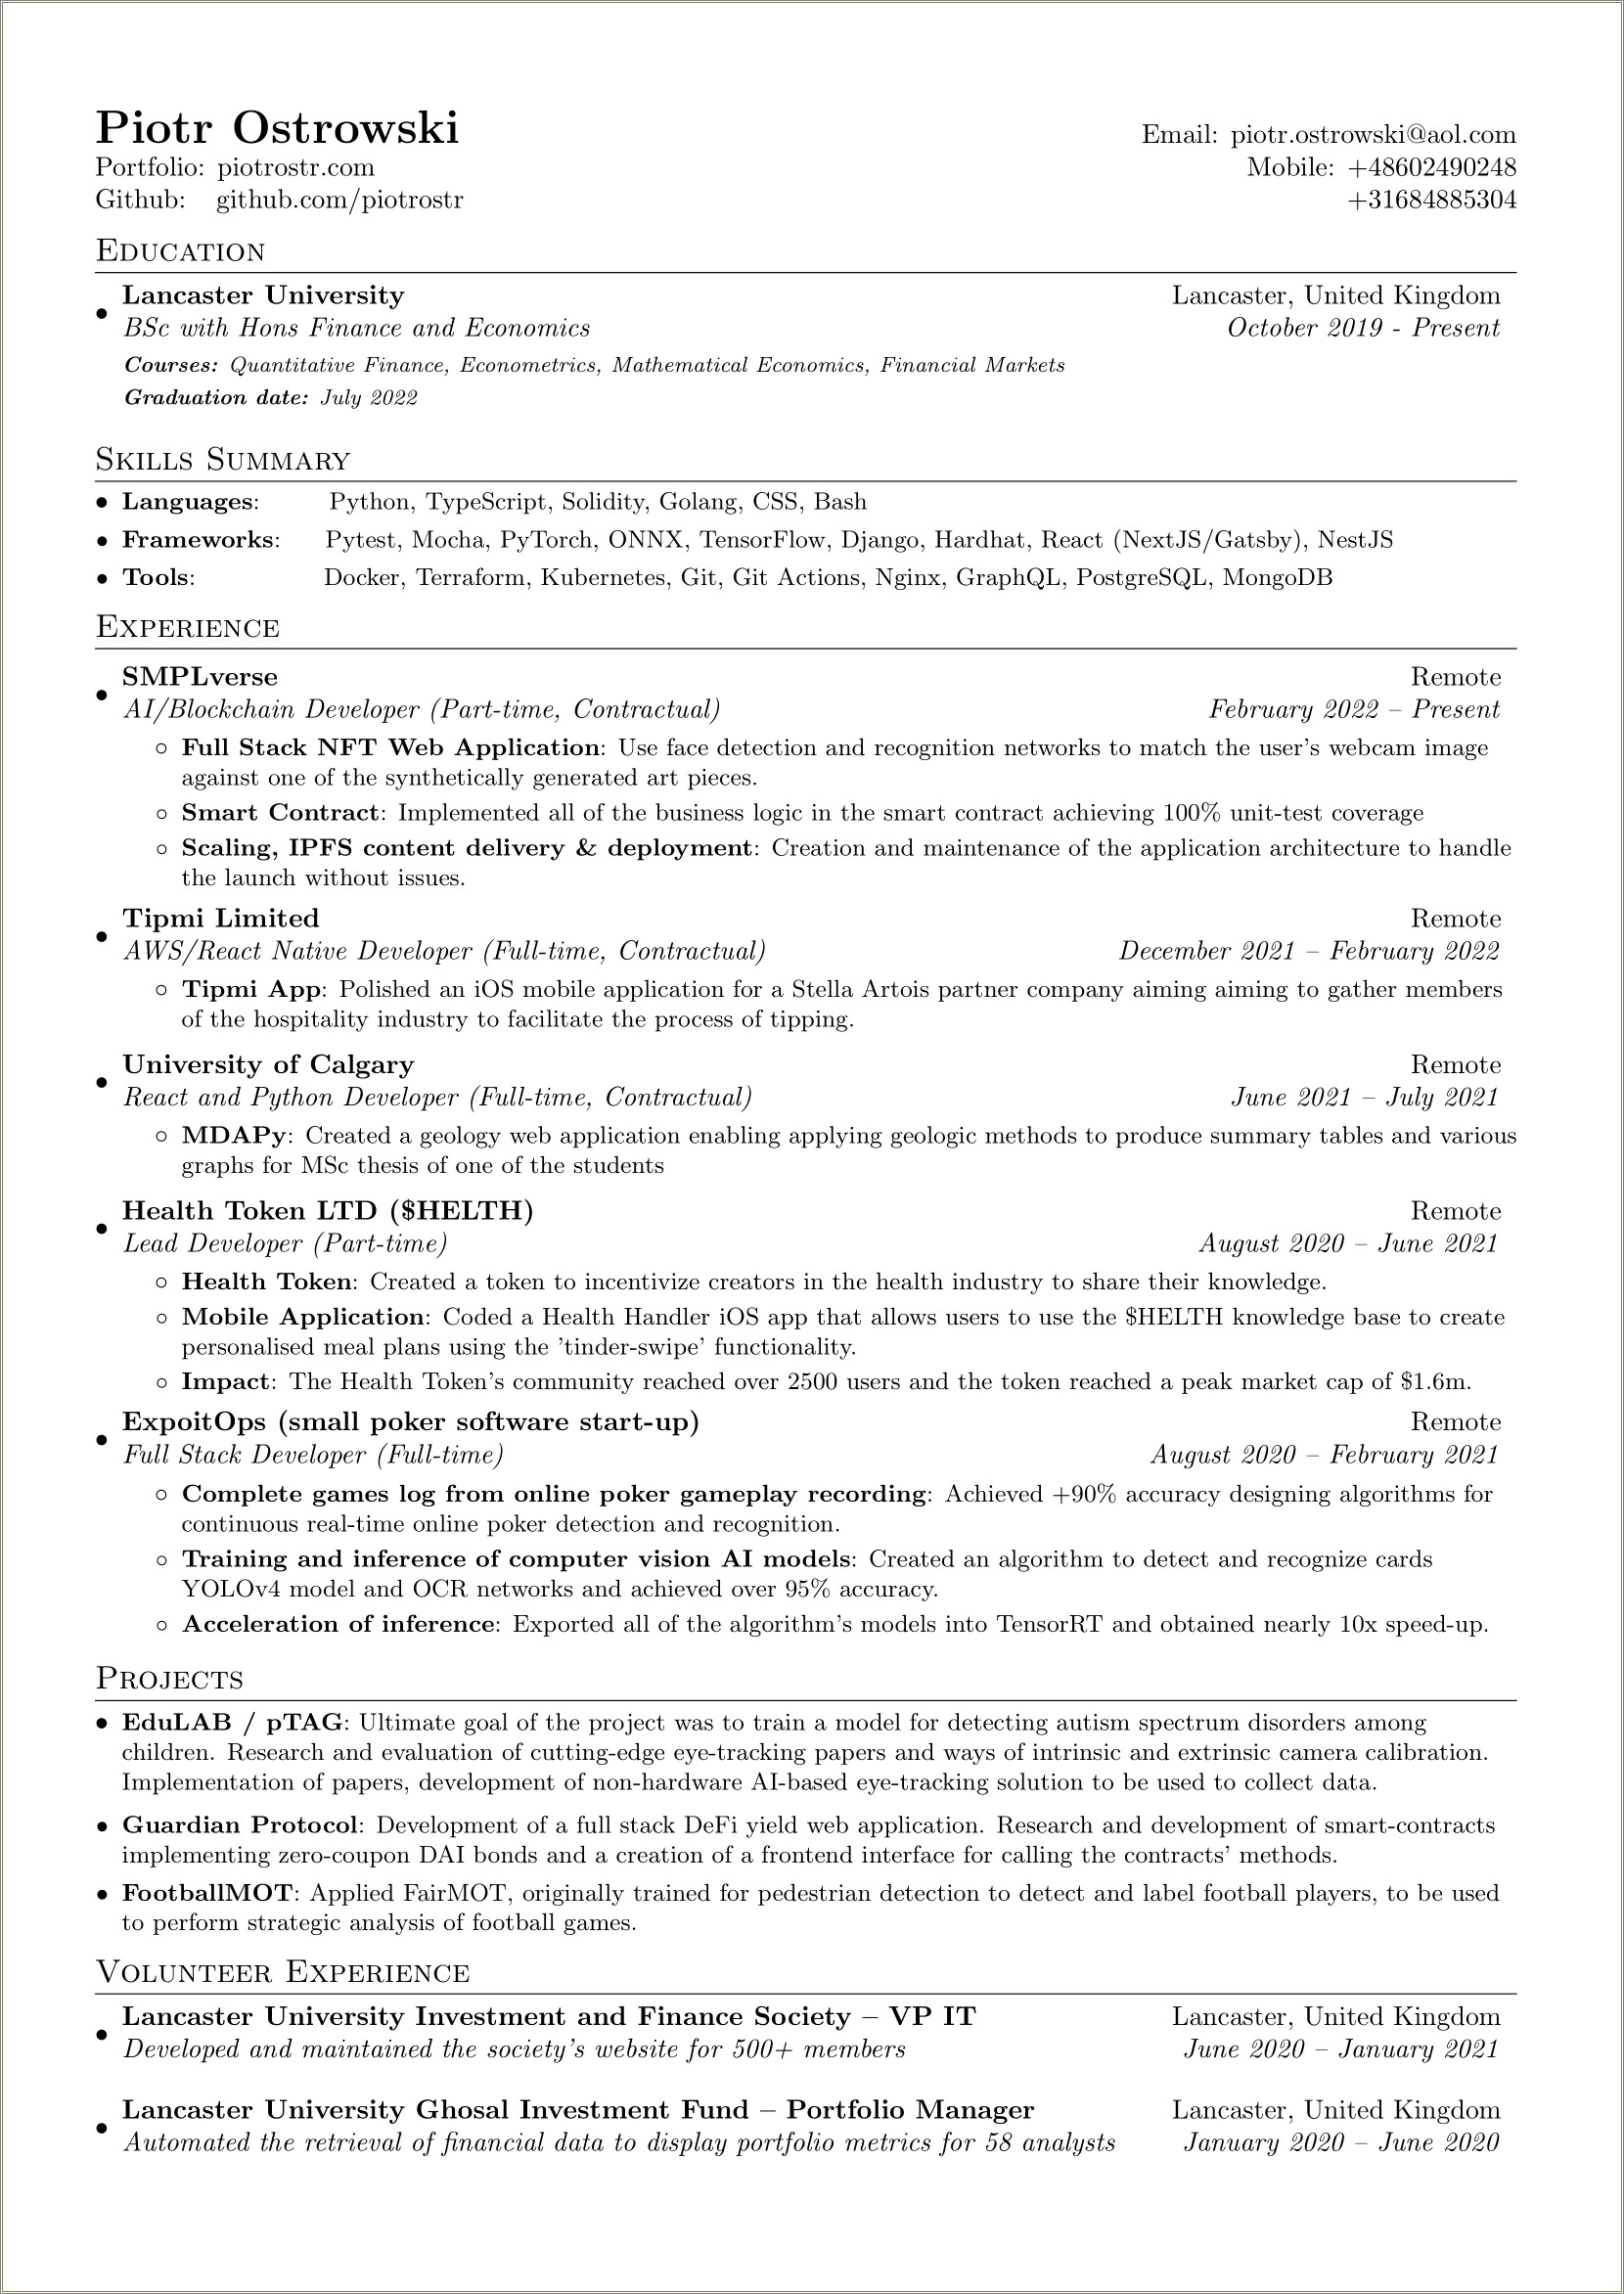 Resume Working With Children Who Have Autism